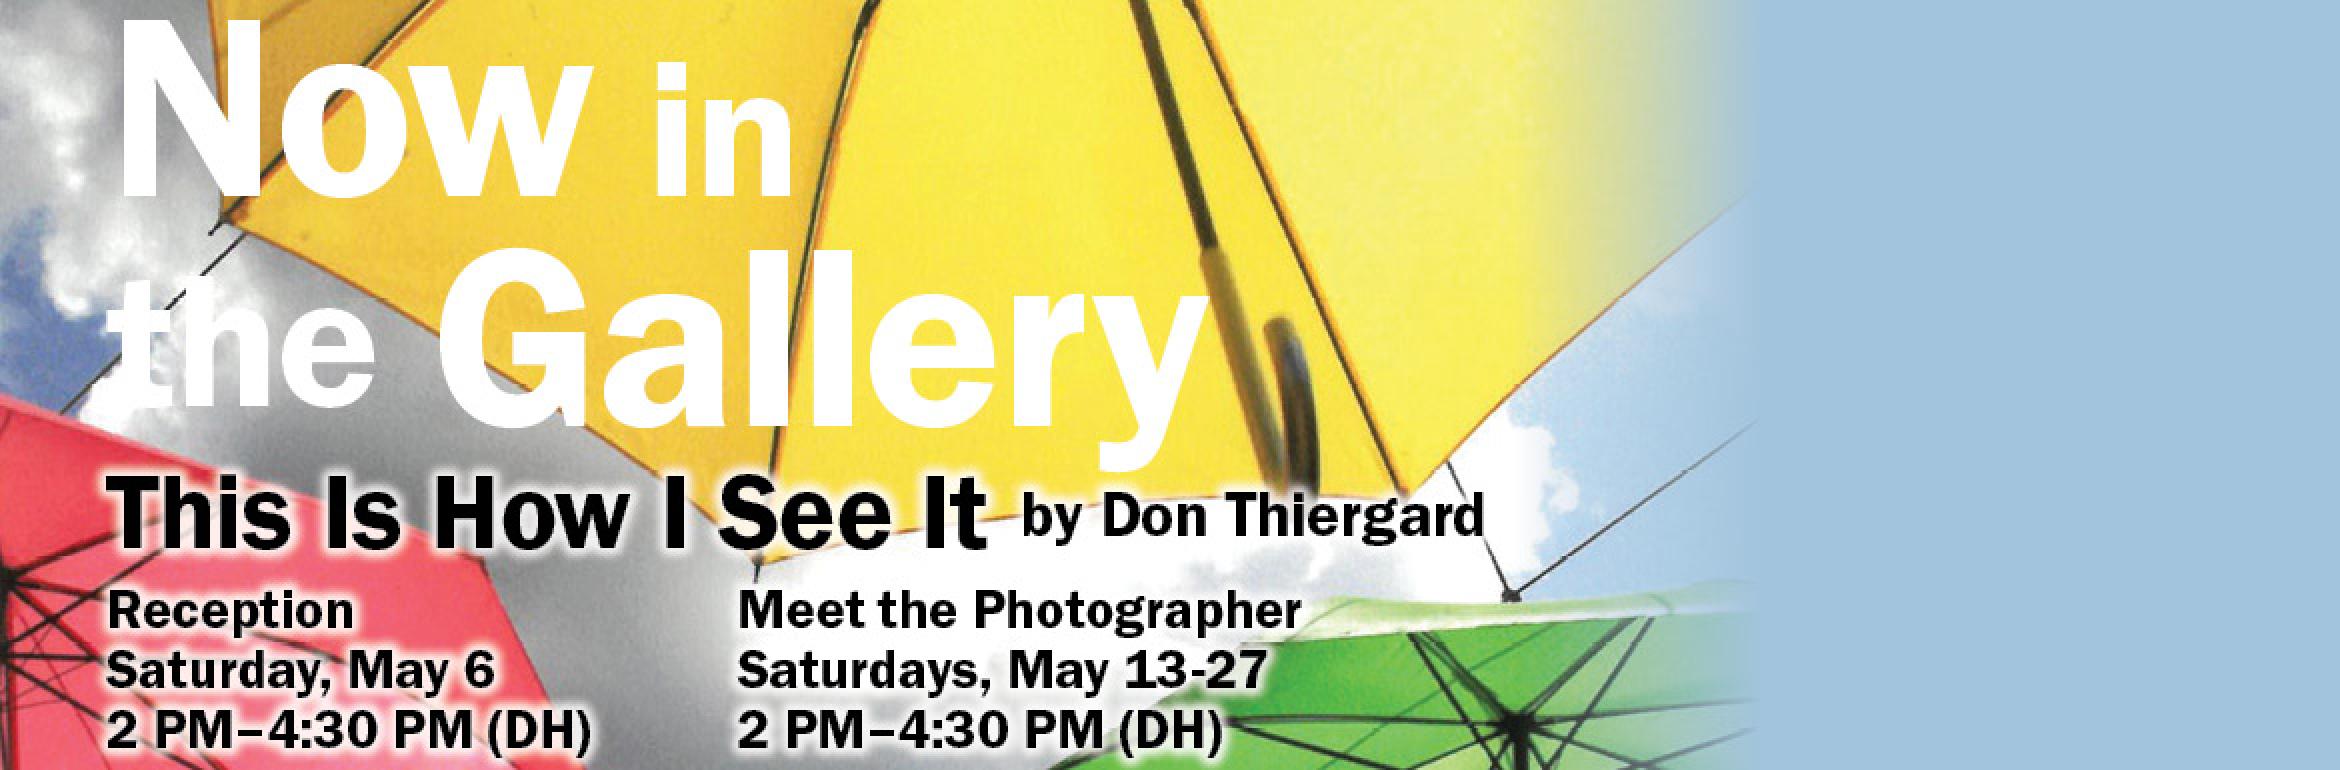 Now in the Gallery. This Is How I See It by Don Thiergard. Reception. Saturday, May 6. 2 PM–4:30 PM (DH). Meet the Photographer. Saturdays, May 13-27. 2 PM–4:30 PM (DH).